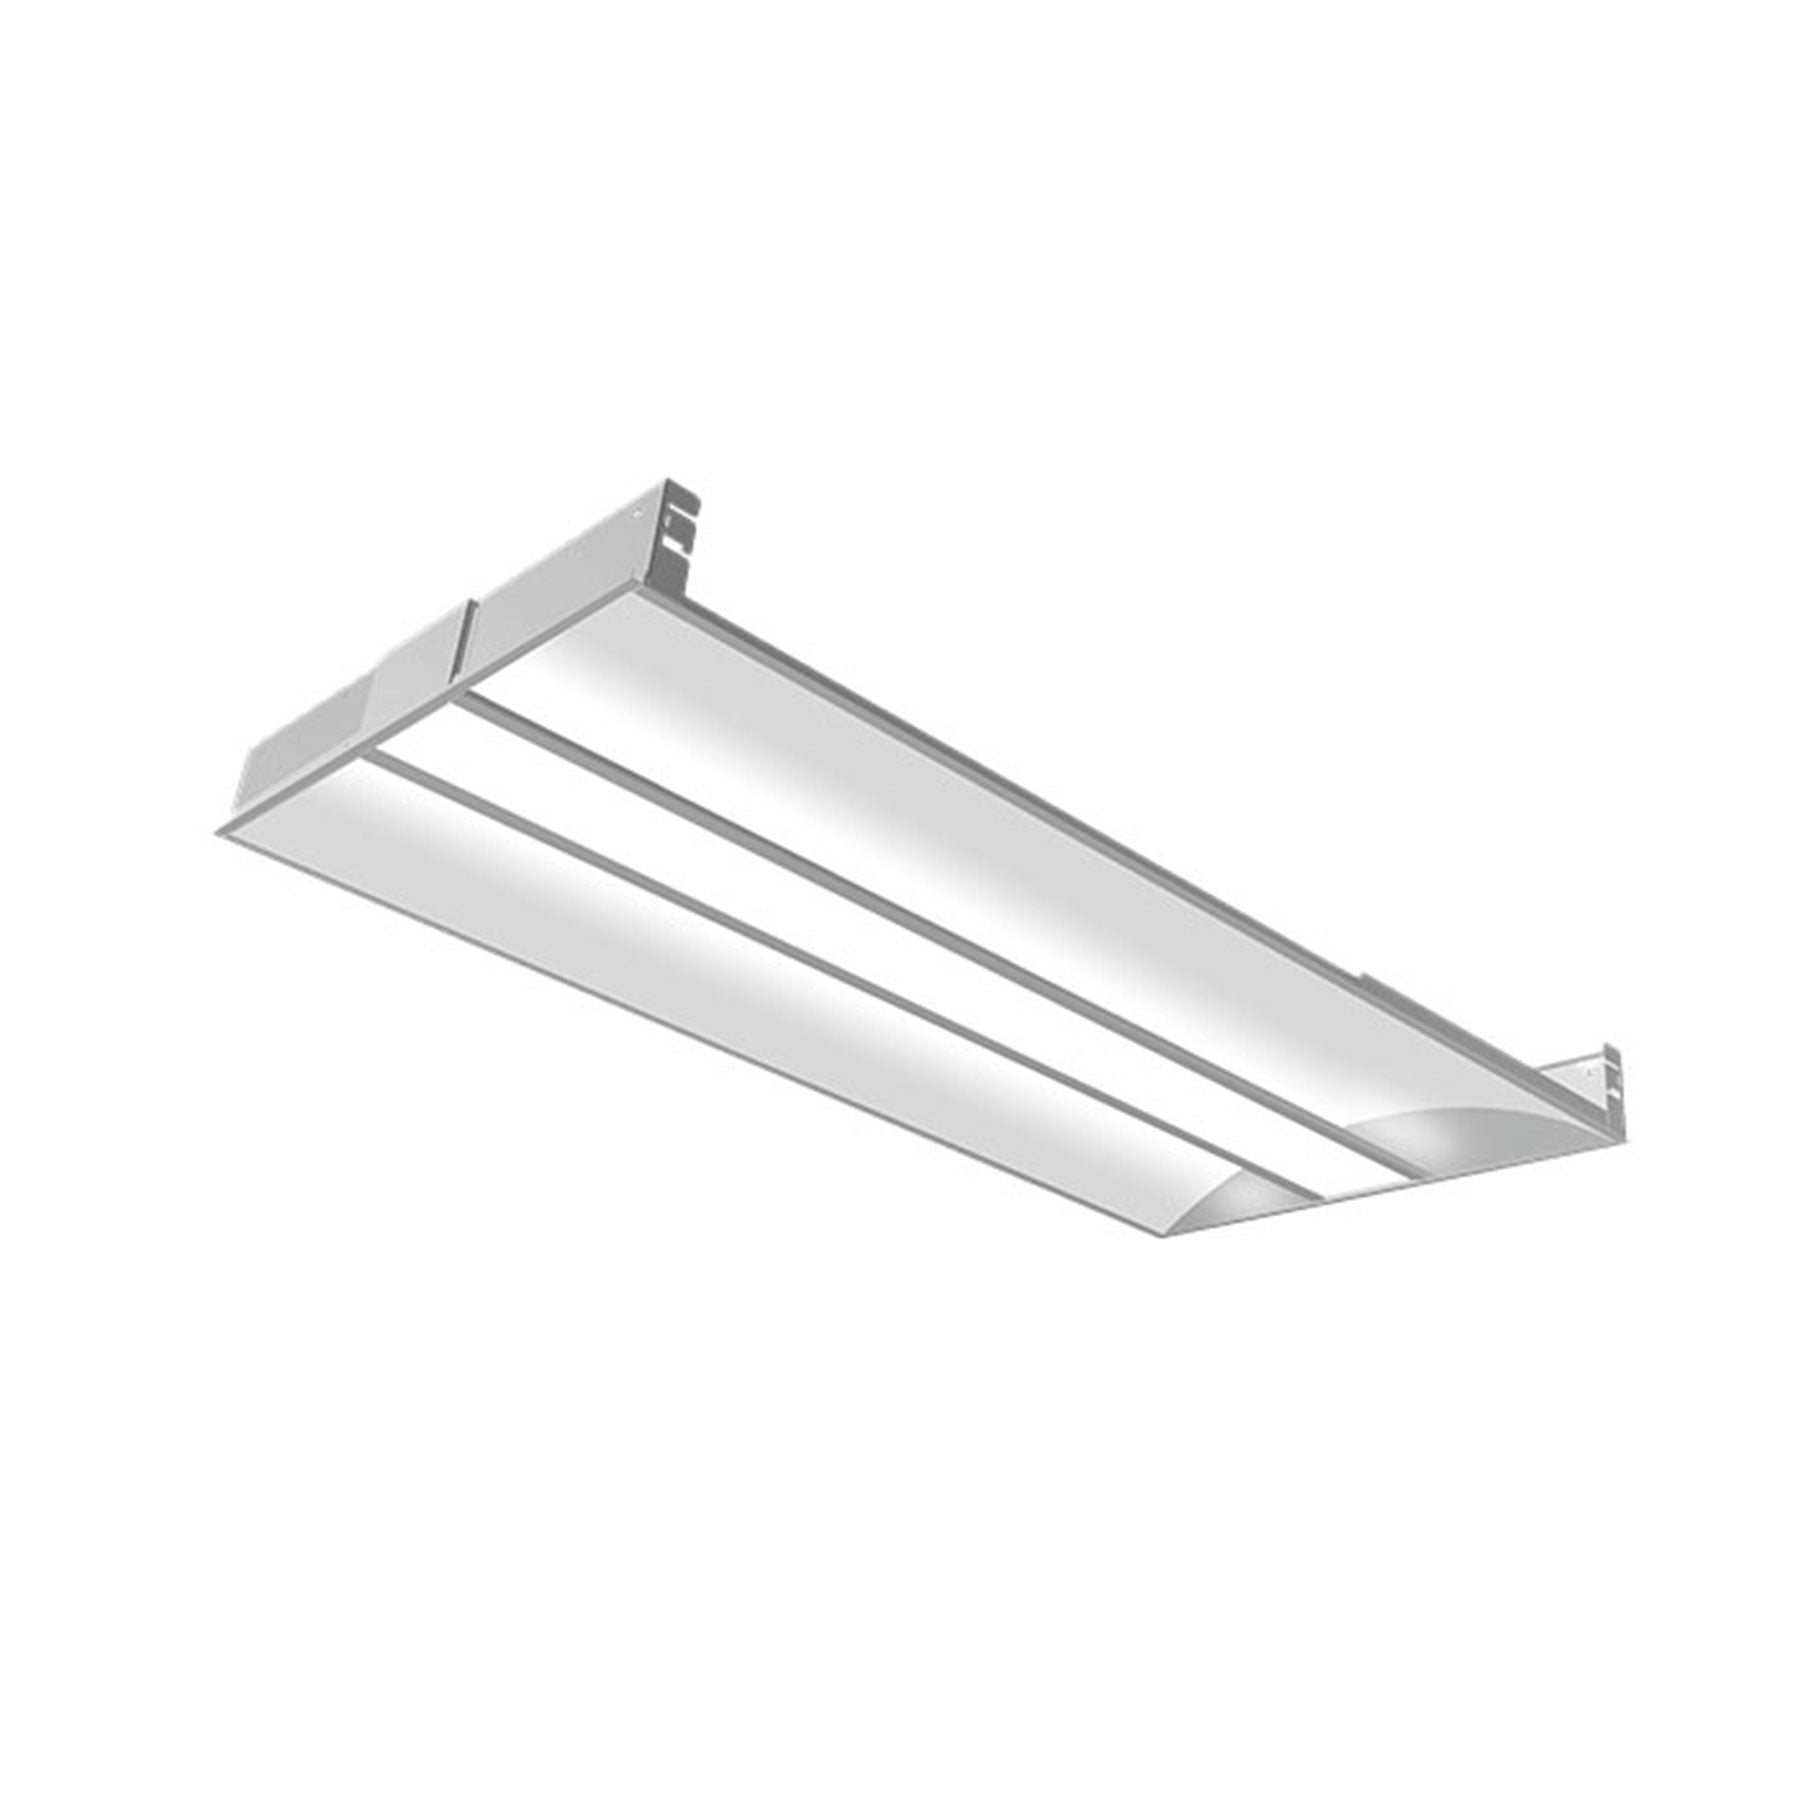 2x4 Architectural Recessed Troffer LED Light, Watt Switchable 30W/40W/50W, CCT Tunable 3000K/3500K/4000K, AC100-277V, UL, DLC Listed, Center Basket Troffer for Commercial Spaces